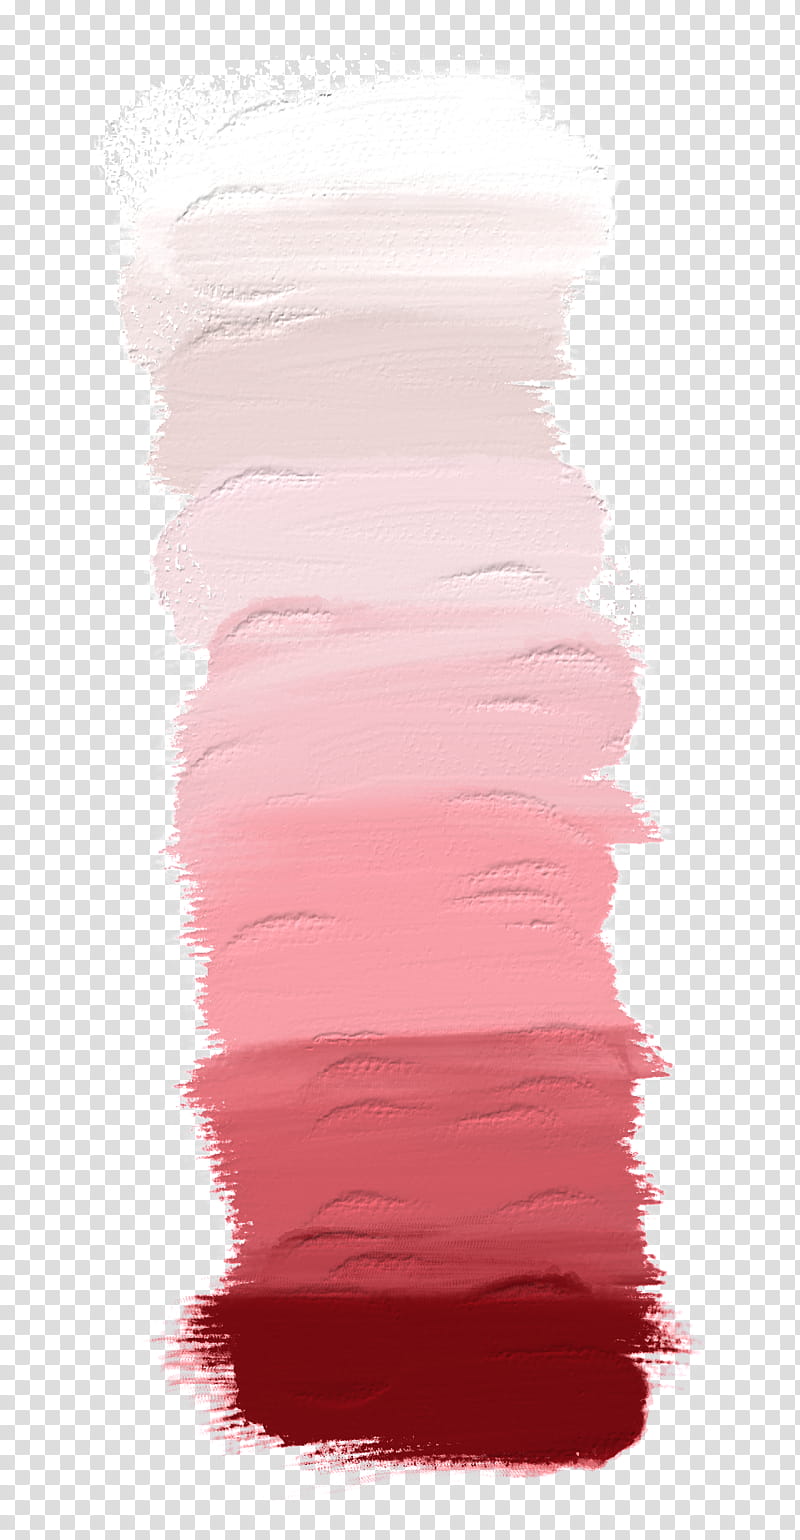 Paint Brush, Painting, Palette, Paint Brushes, Sticker, Text, Pink, Red transparent background PNG clipart